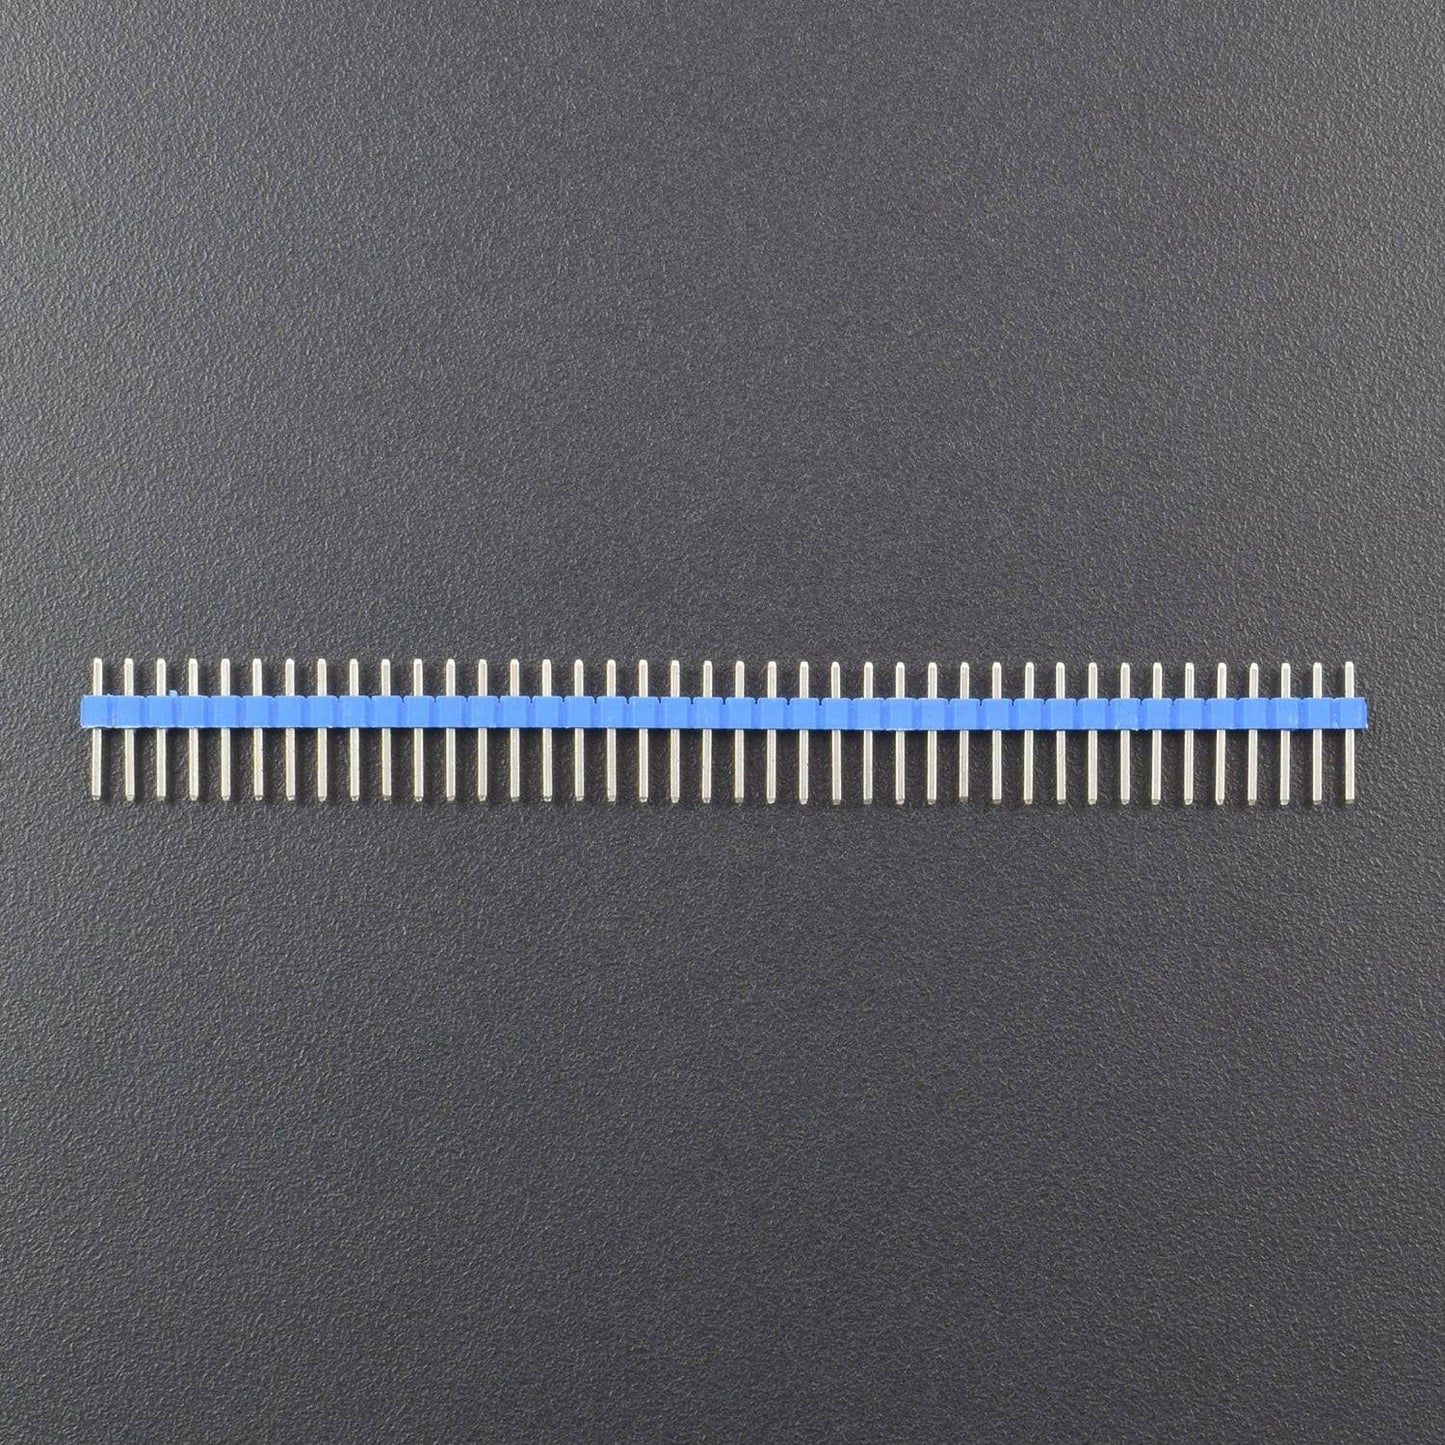 40 Pin Blue Male Header With 2.54 mm Spacing - RC124 - REES52